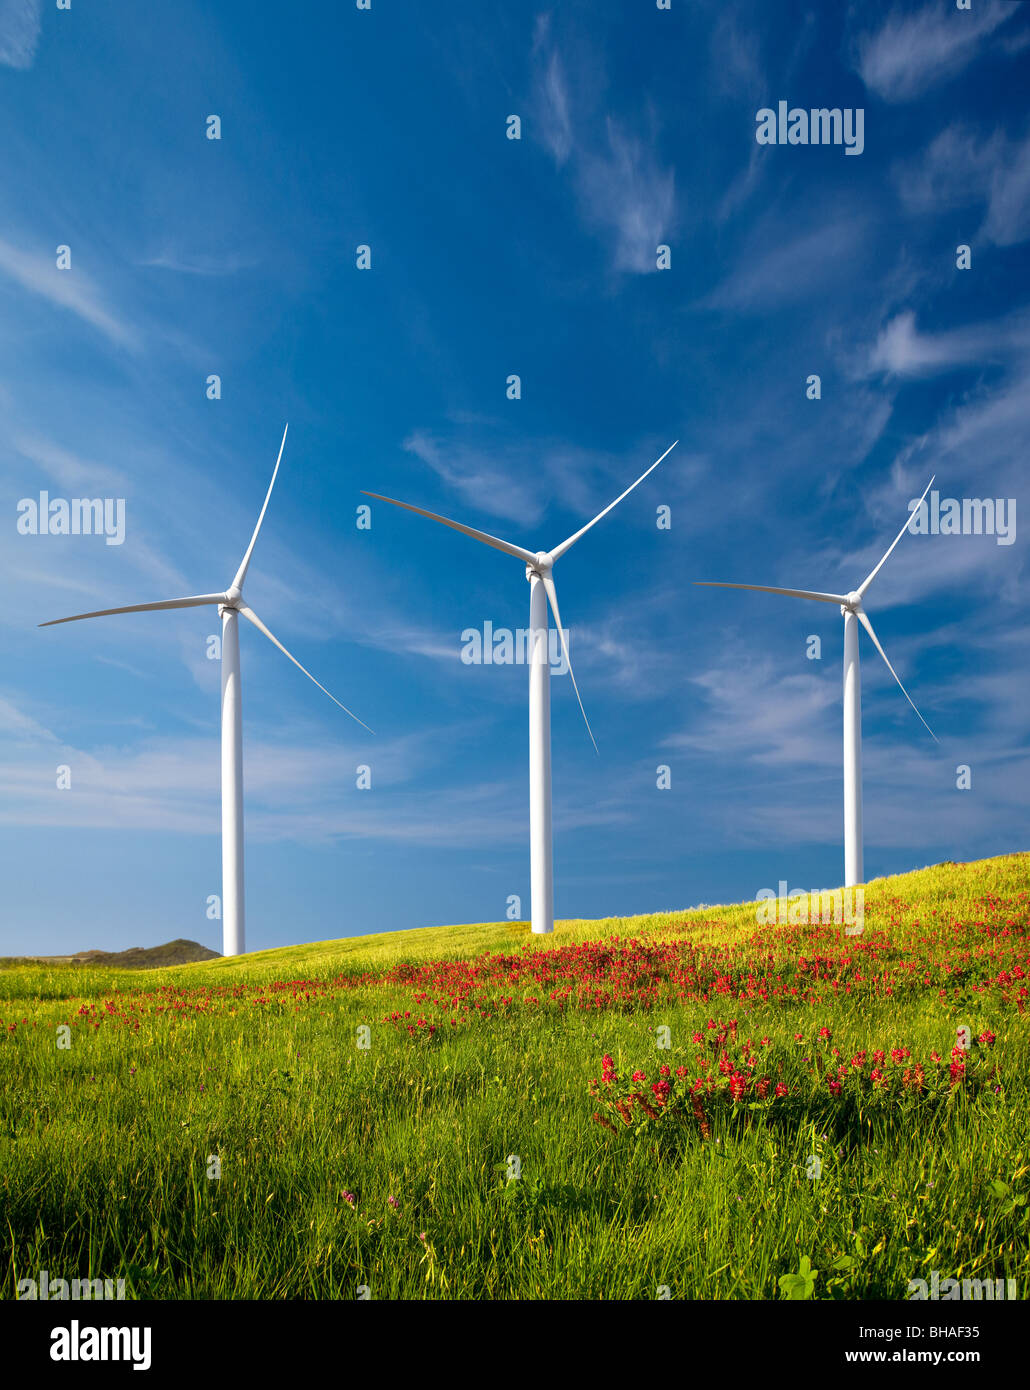 Beautiful green meadow with Wind turbines generating electricity Stock Photo